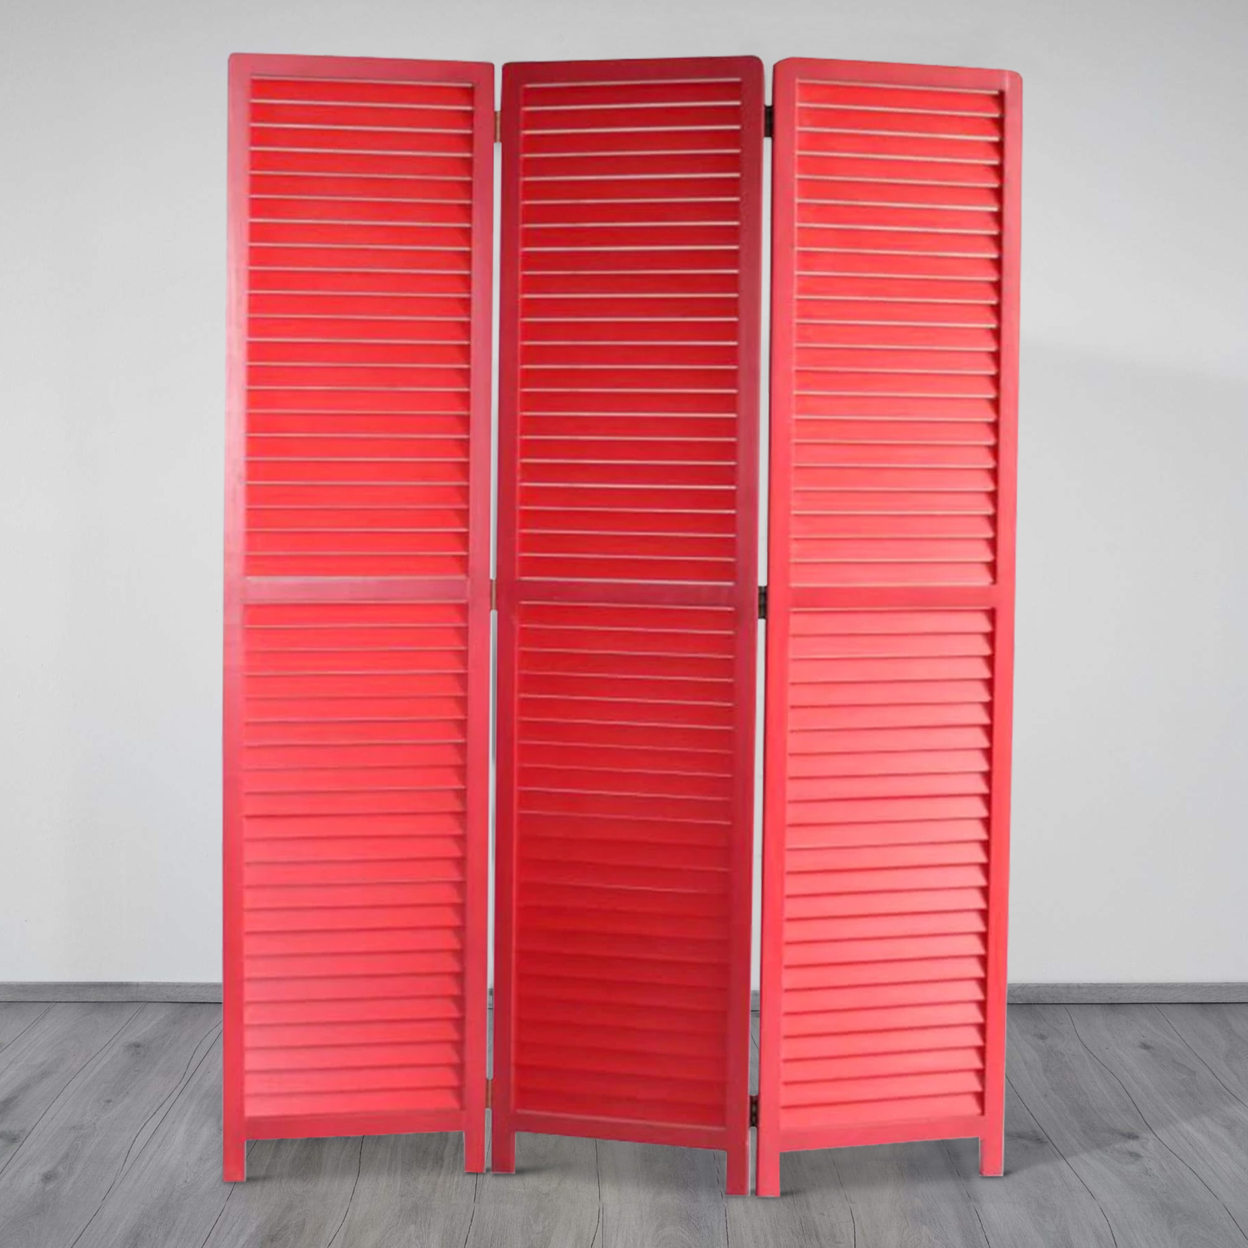 Transitional Wooden Screen With 3 Panels And Shutter Design, Red- Saltoro Sherpi